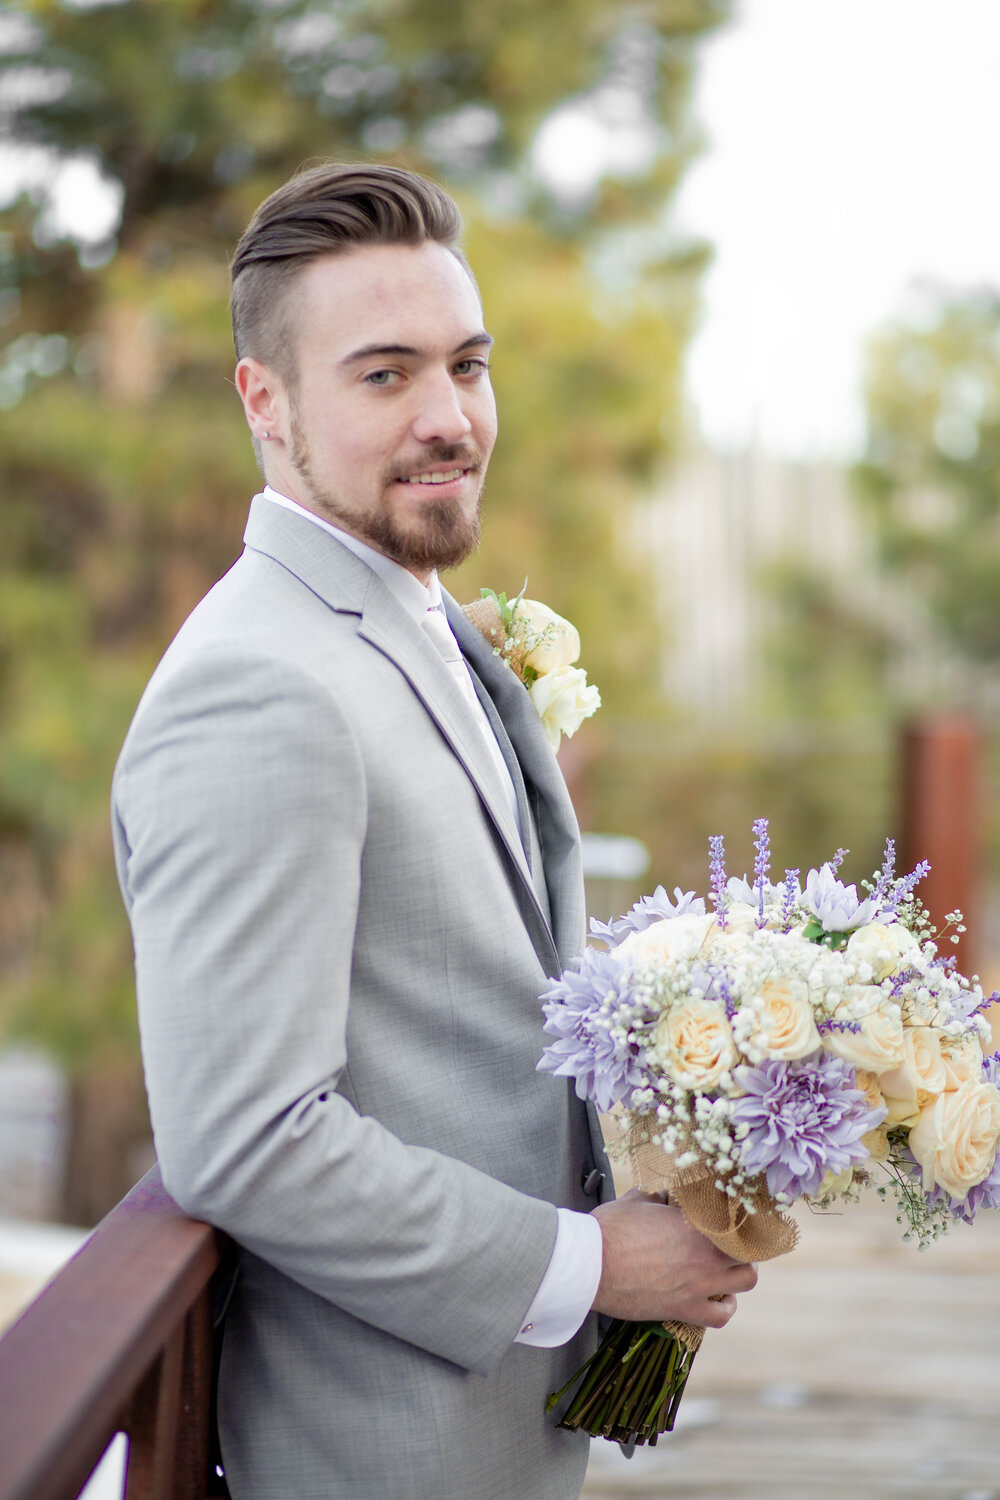 Groom for the win! When he holds the bouquet | By The Vow Collective 